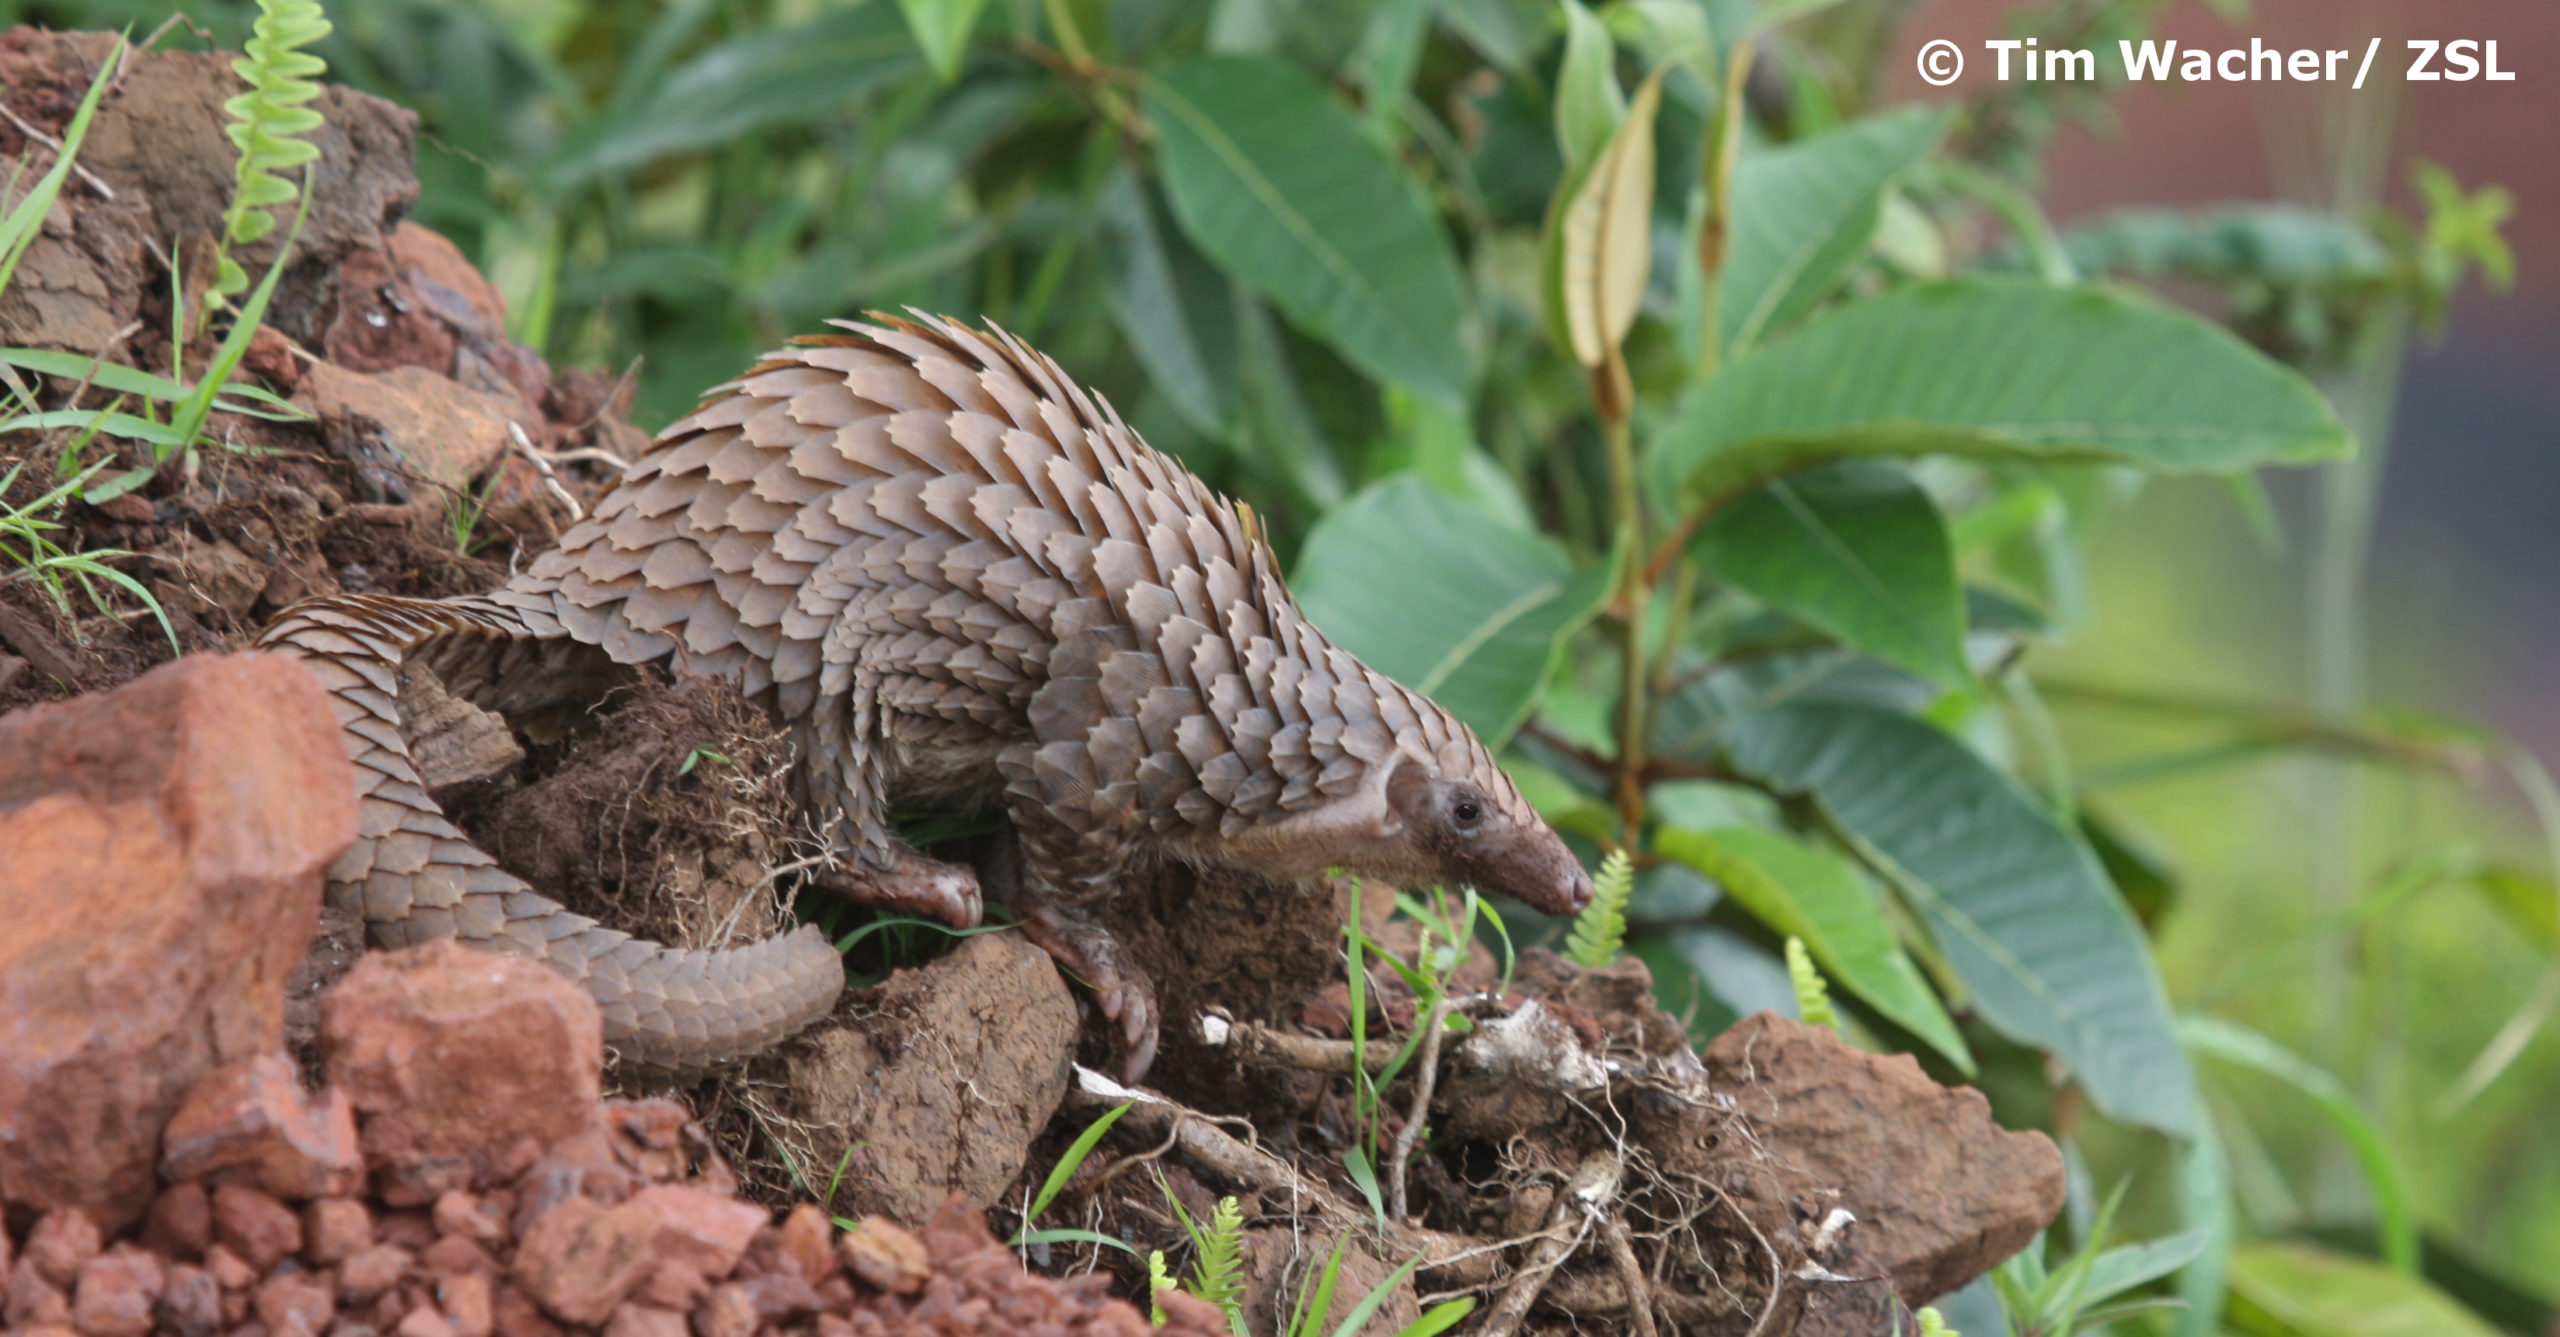 World Pangolin Day celebrations highlight pangolin conservation in a critical year and decade for biodiversity